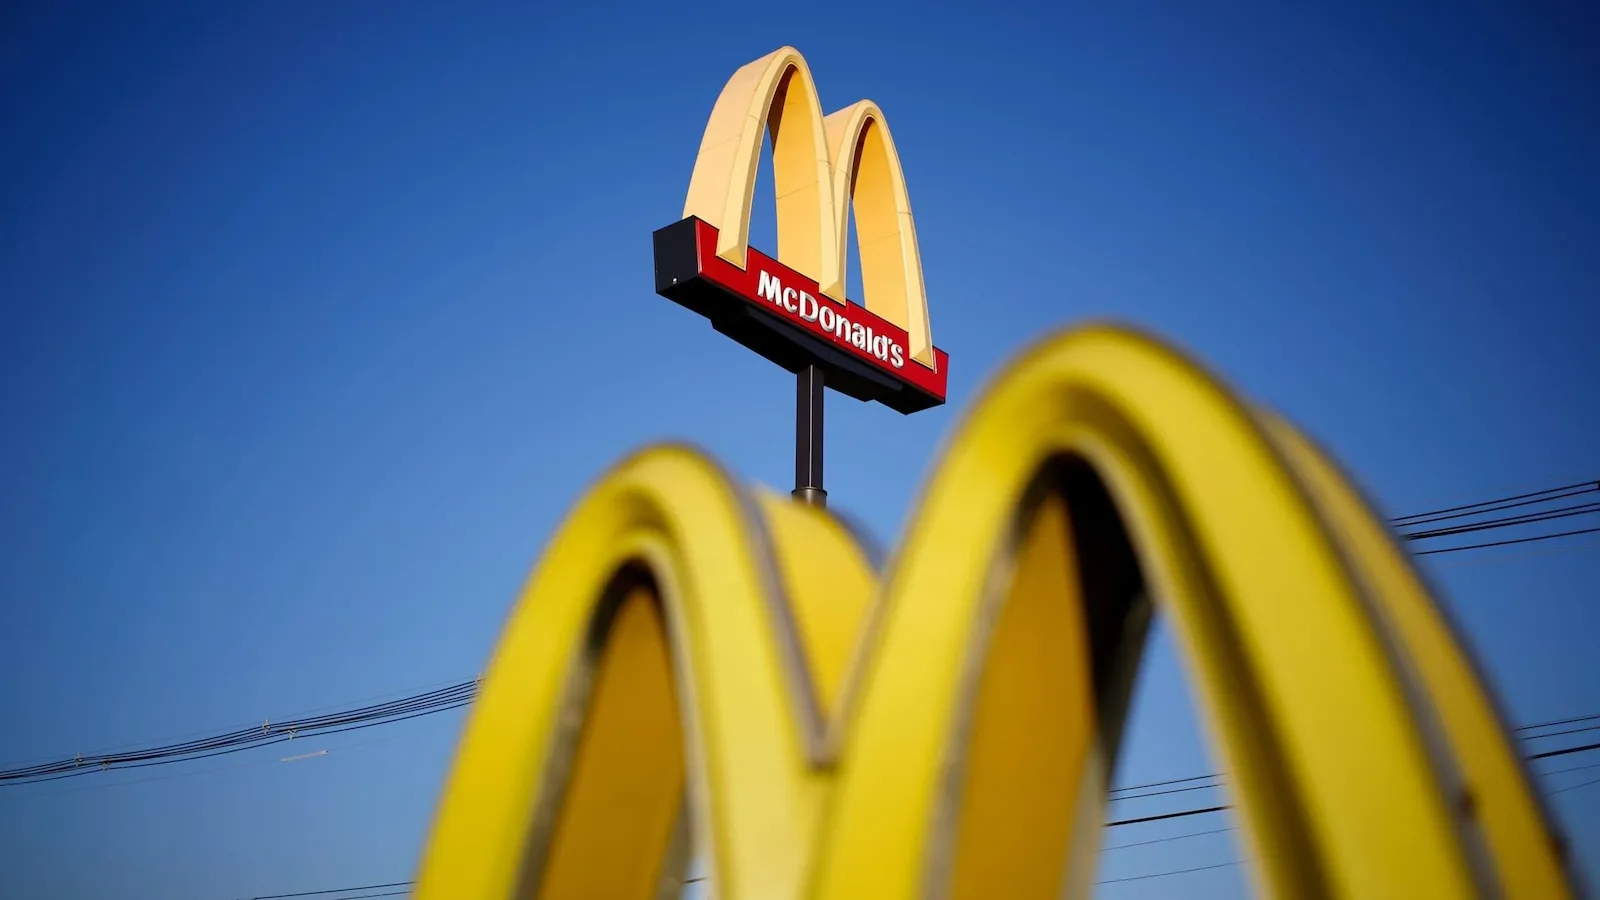 McDonald's Launches Massive Summer Hiring in Kentucky, Offers College Tuition Support--